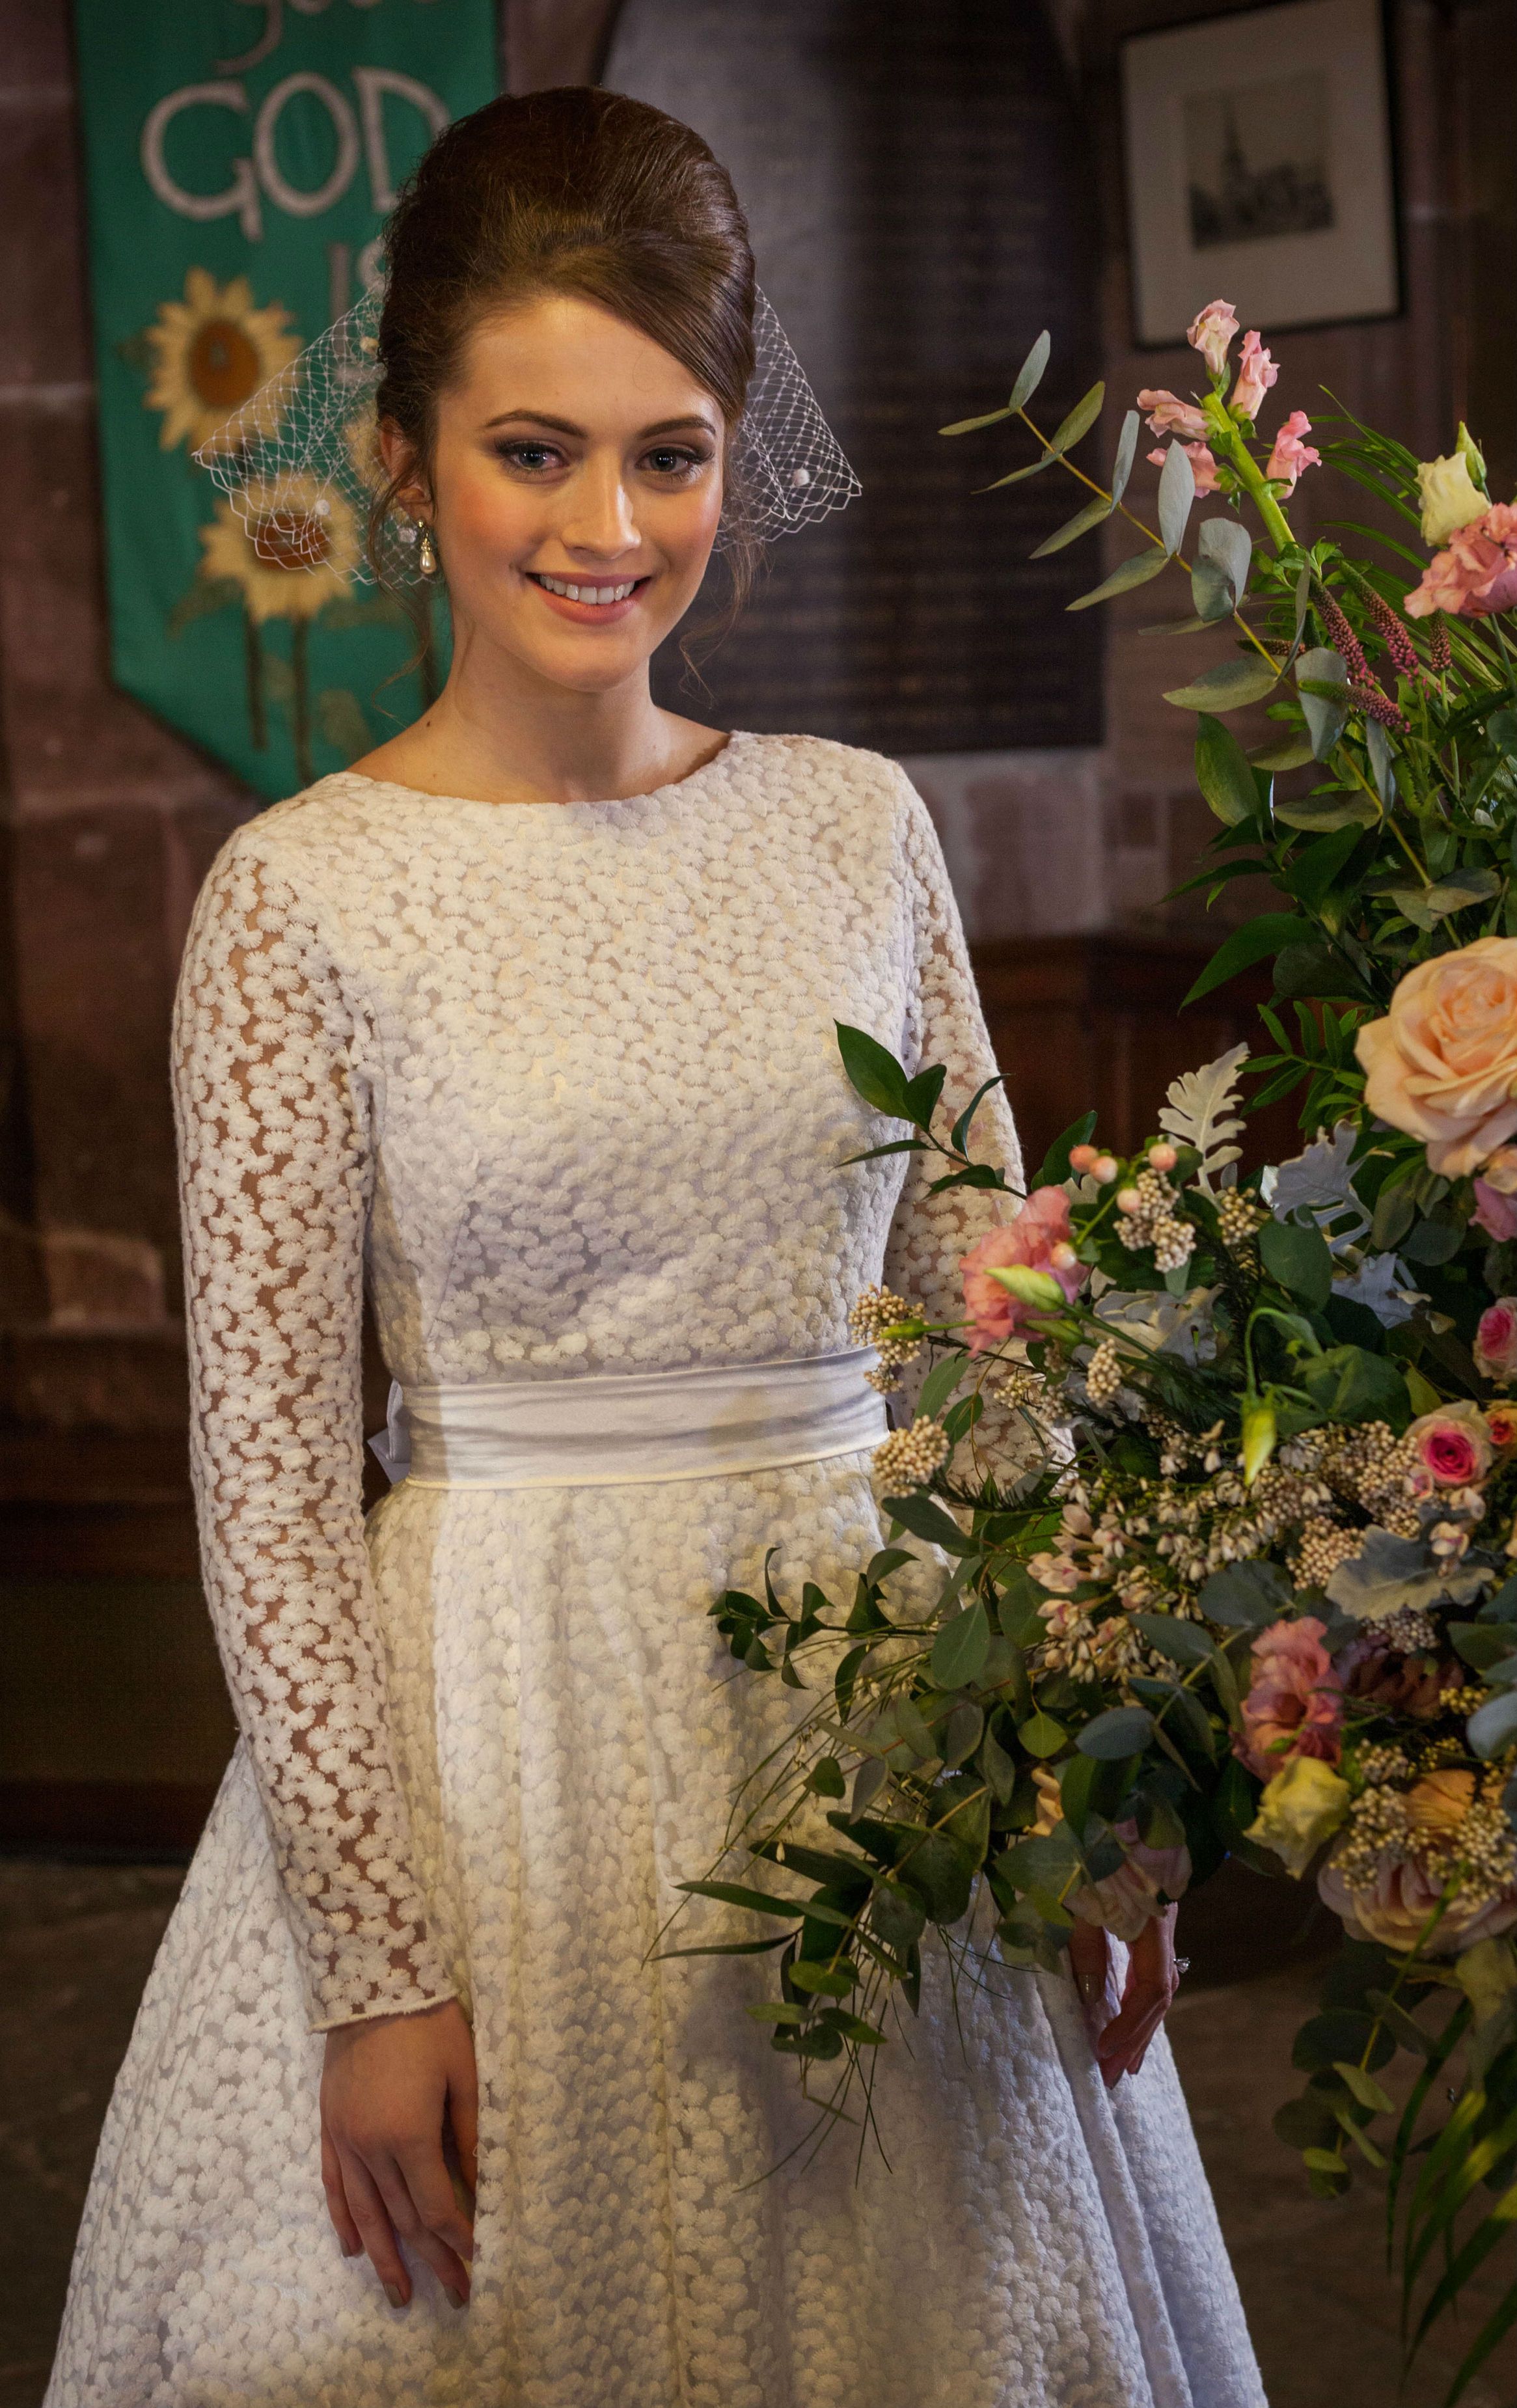 Hollyoaks spoilers –? Prince and Lily's wedding drama revealed